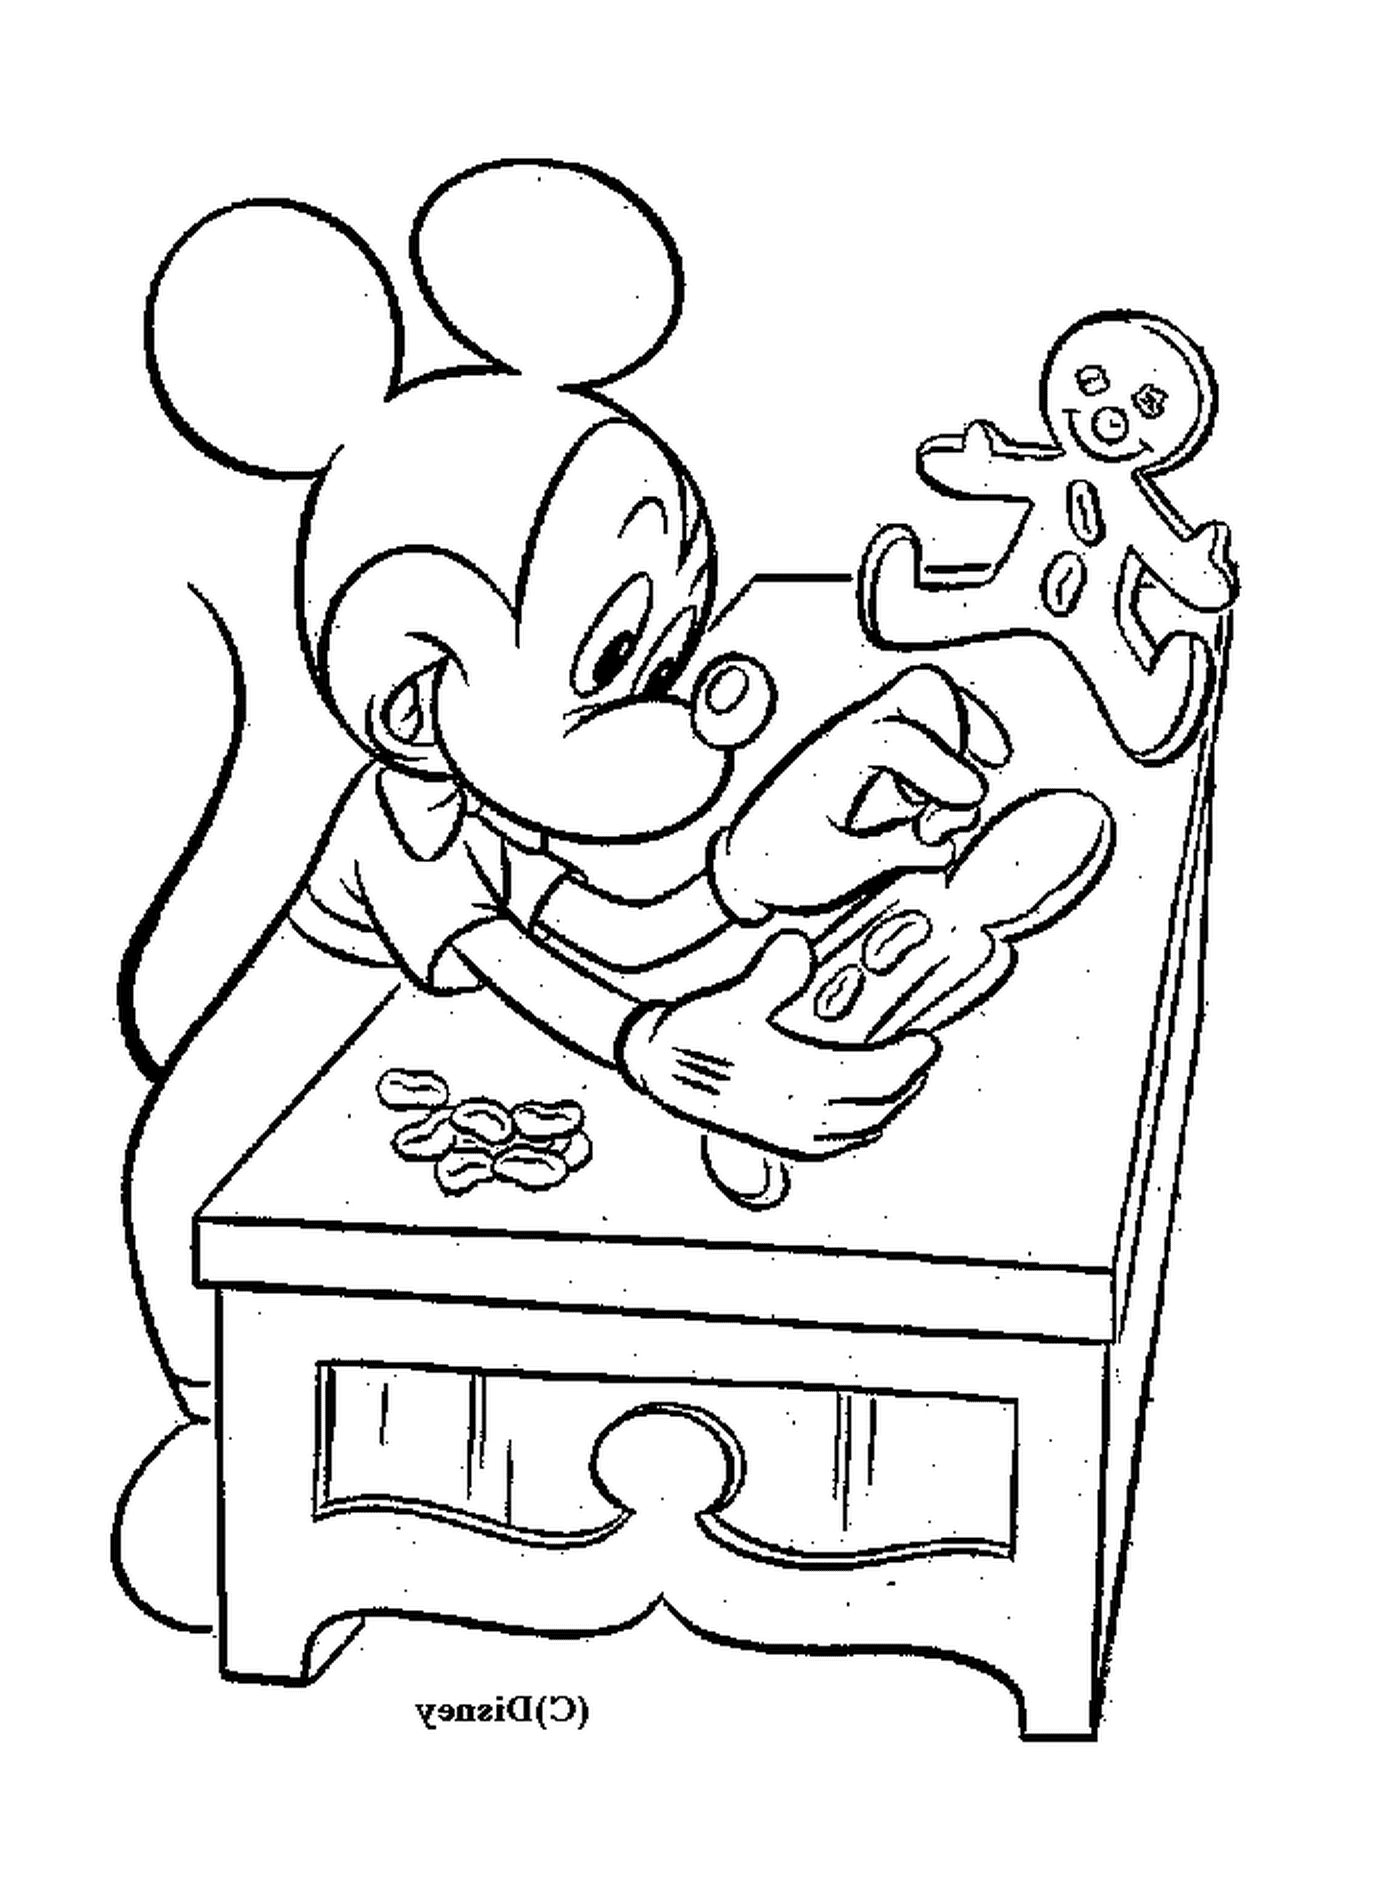  Mickey makes cakes: sitting at a table with a man made of gingerbread 